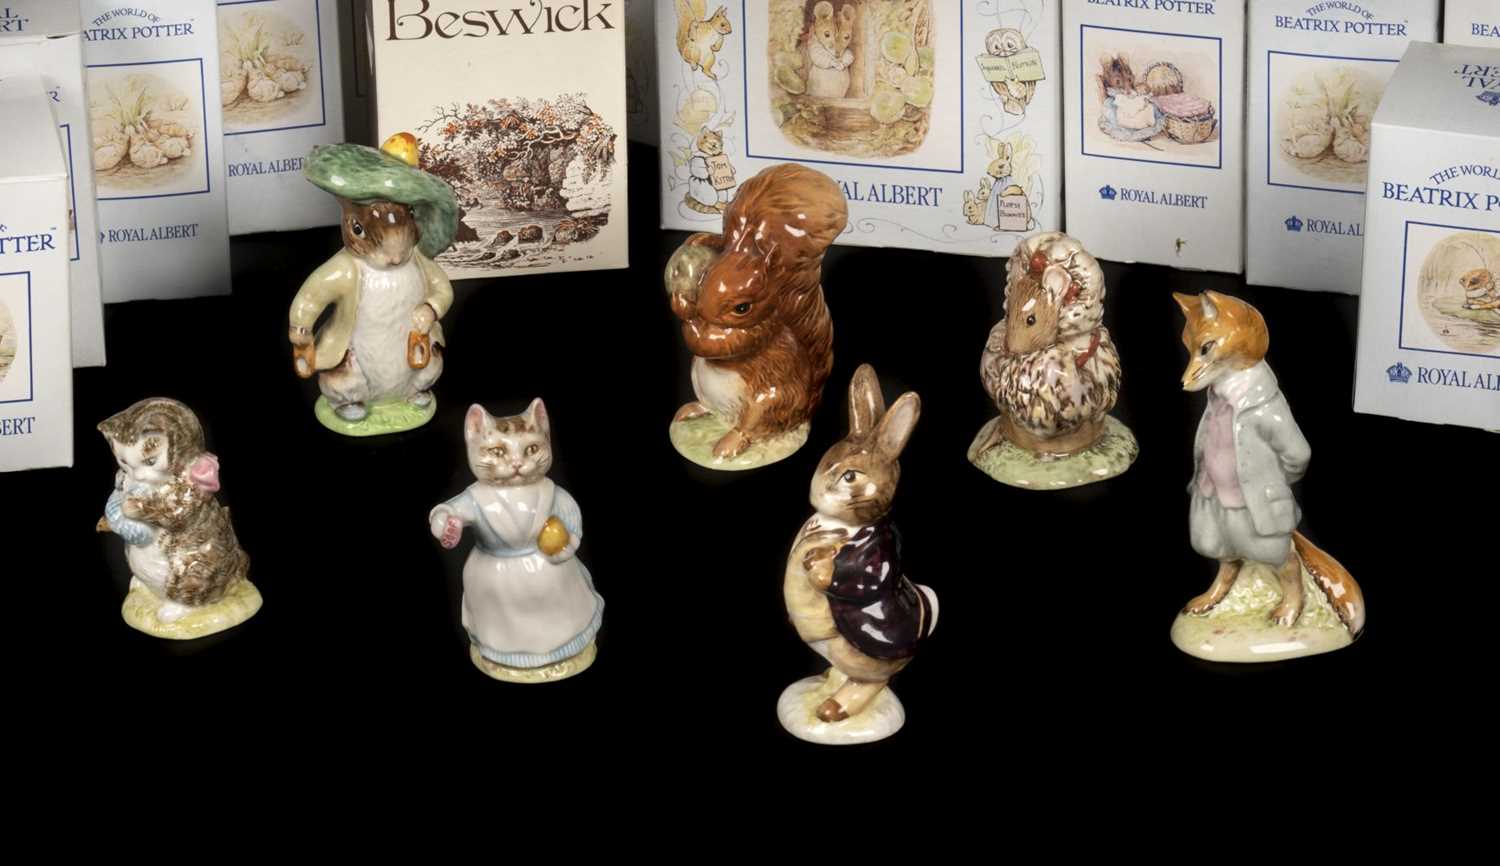 Lot 713 - Potter (Beatrix). A collection of Royal Albert and Beswick figures